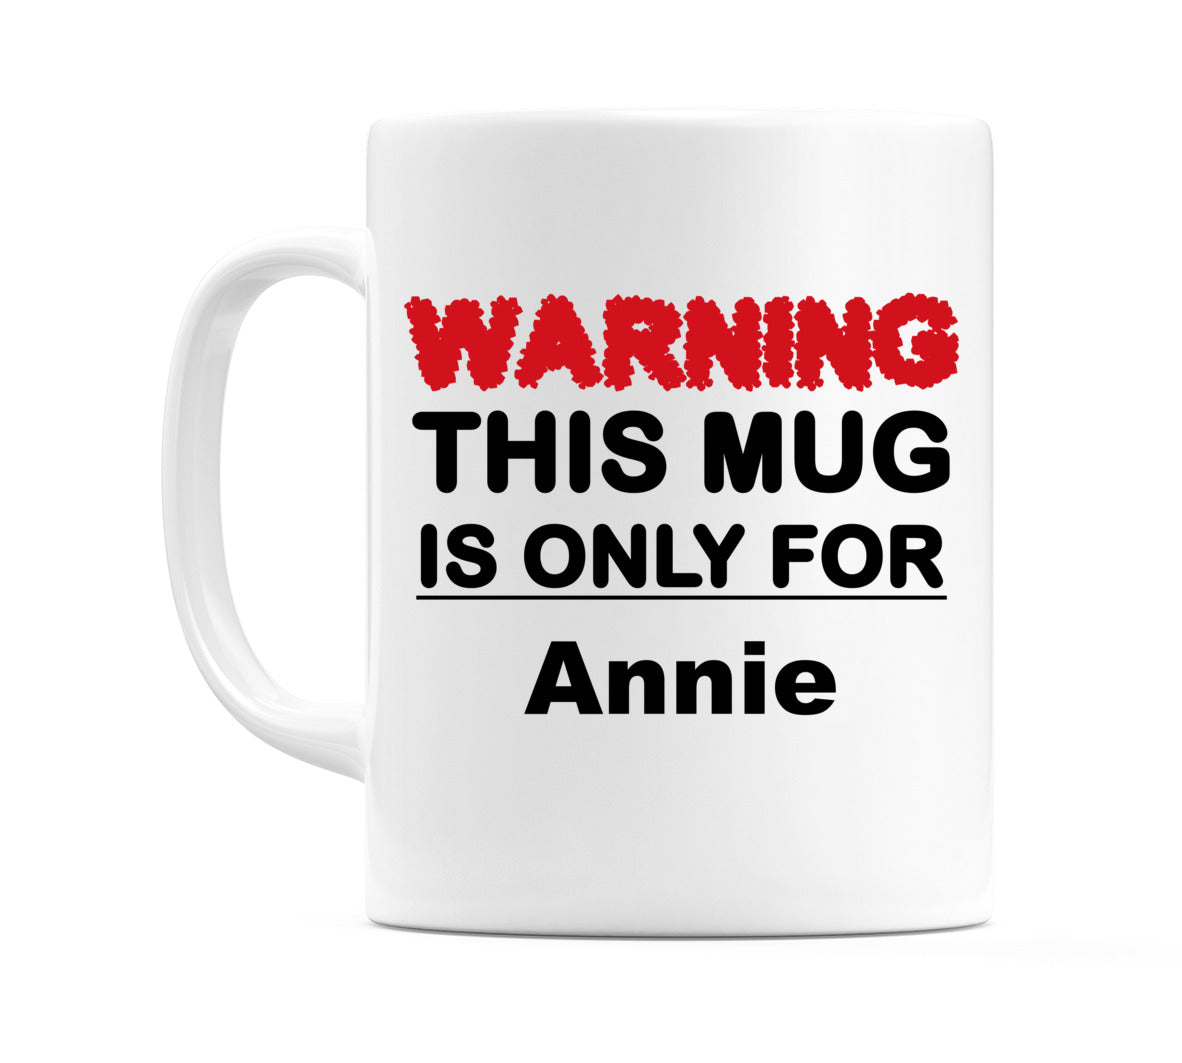 Warning This Mug is ONLY for Annie Mug